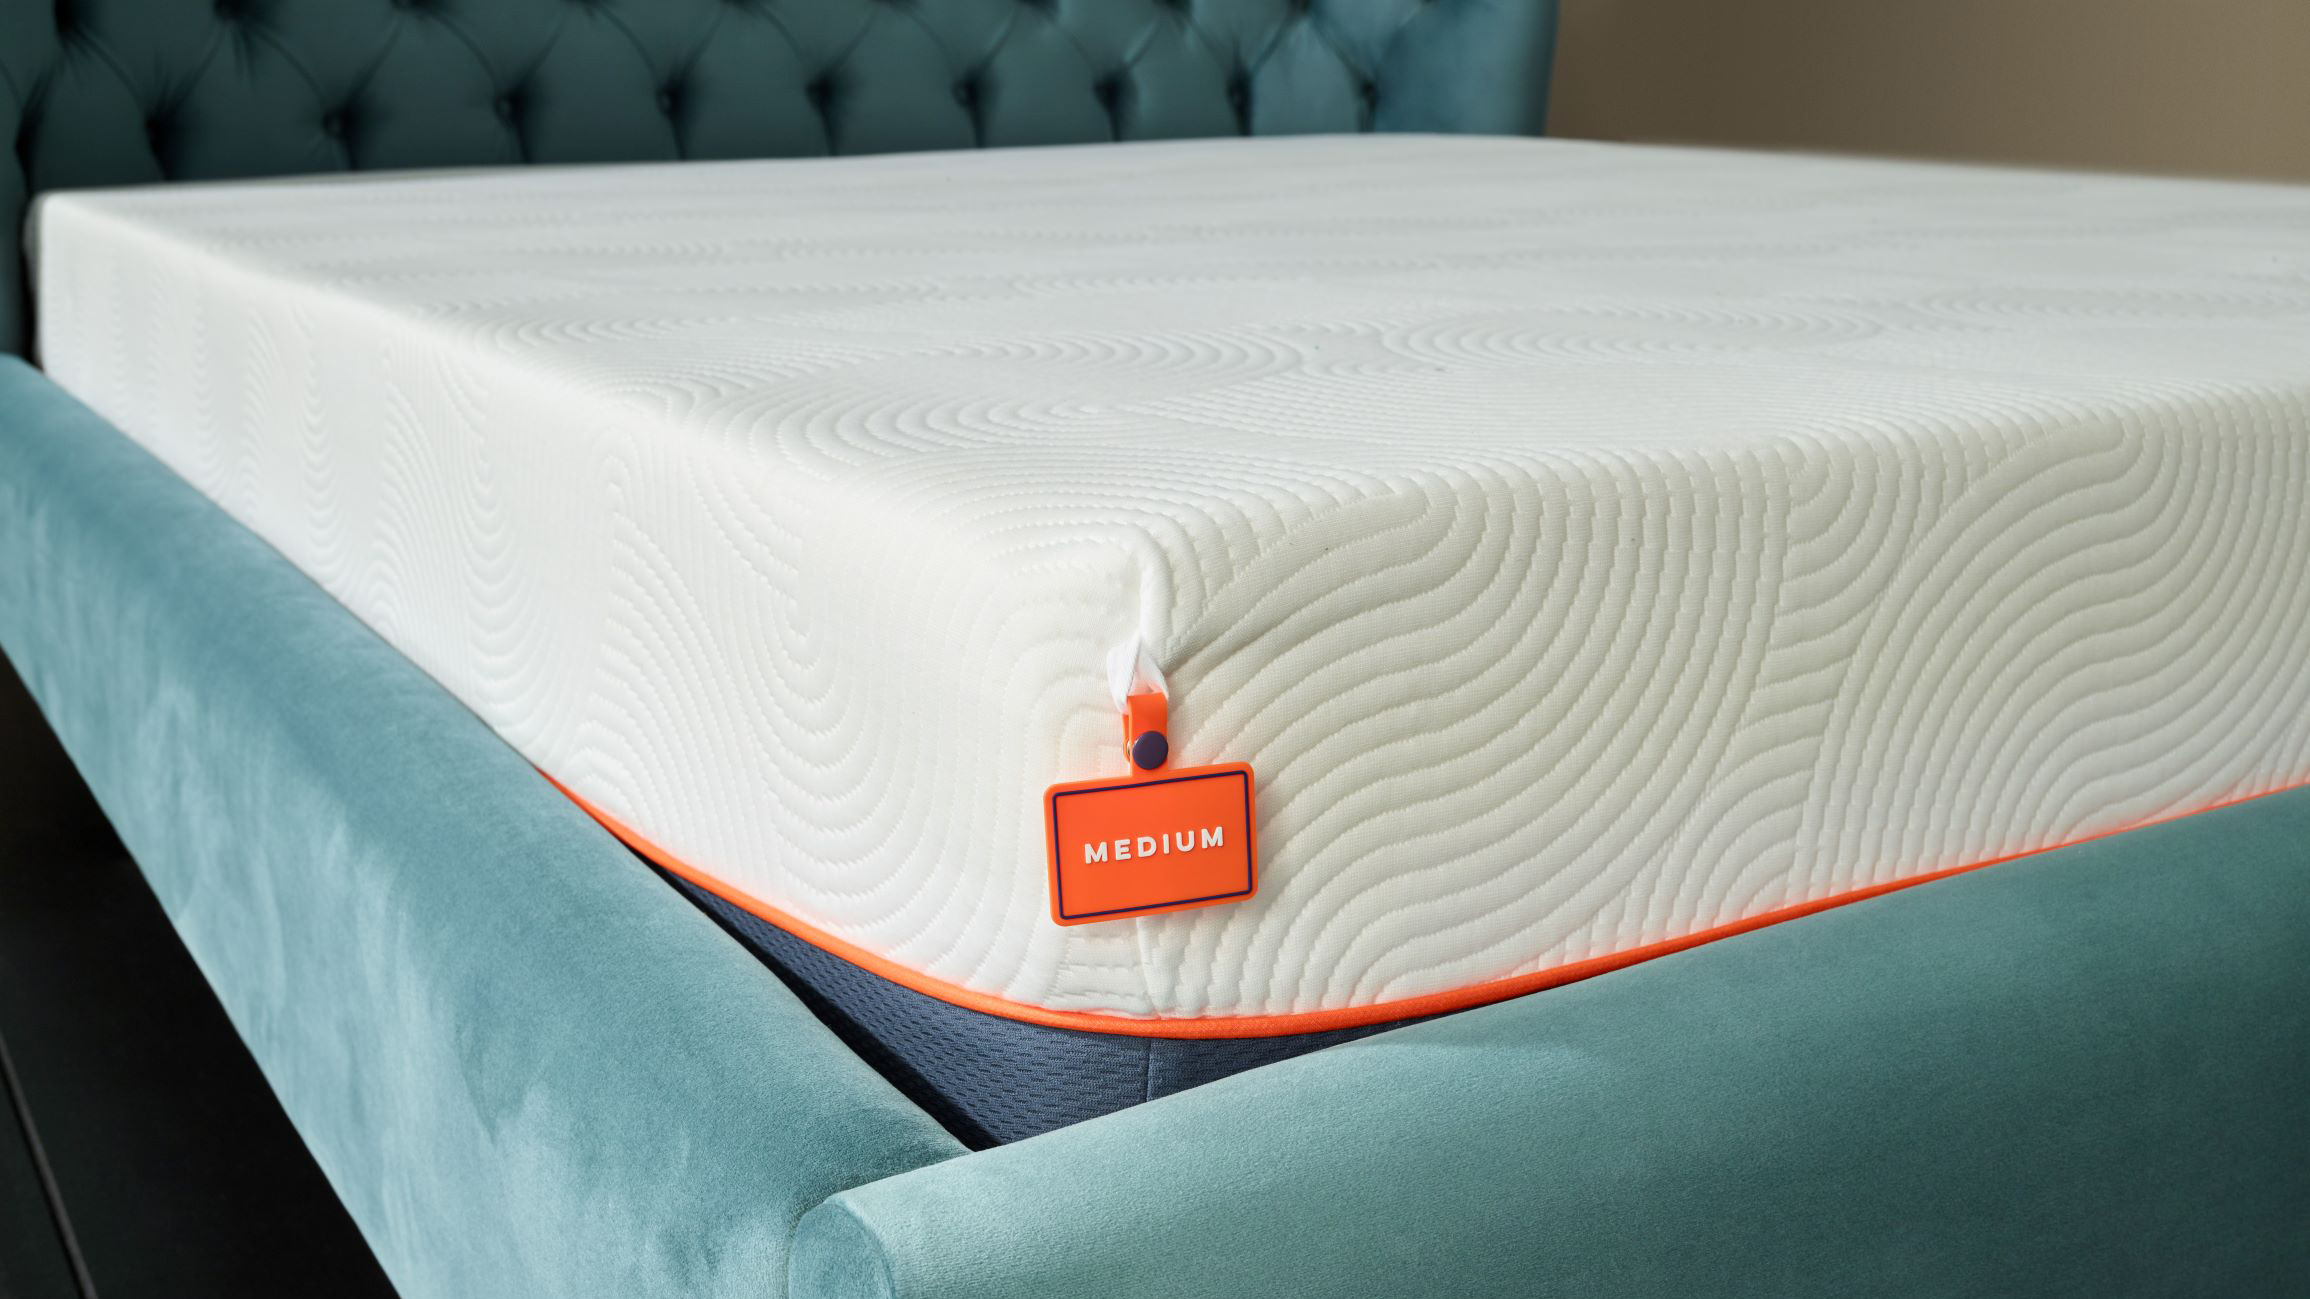 Image shows the bottom left hand corner of the Brook + Wilde Lux Mattress with its white top and navy blue base